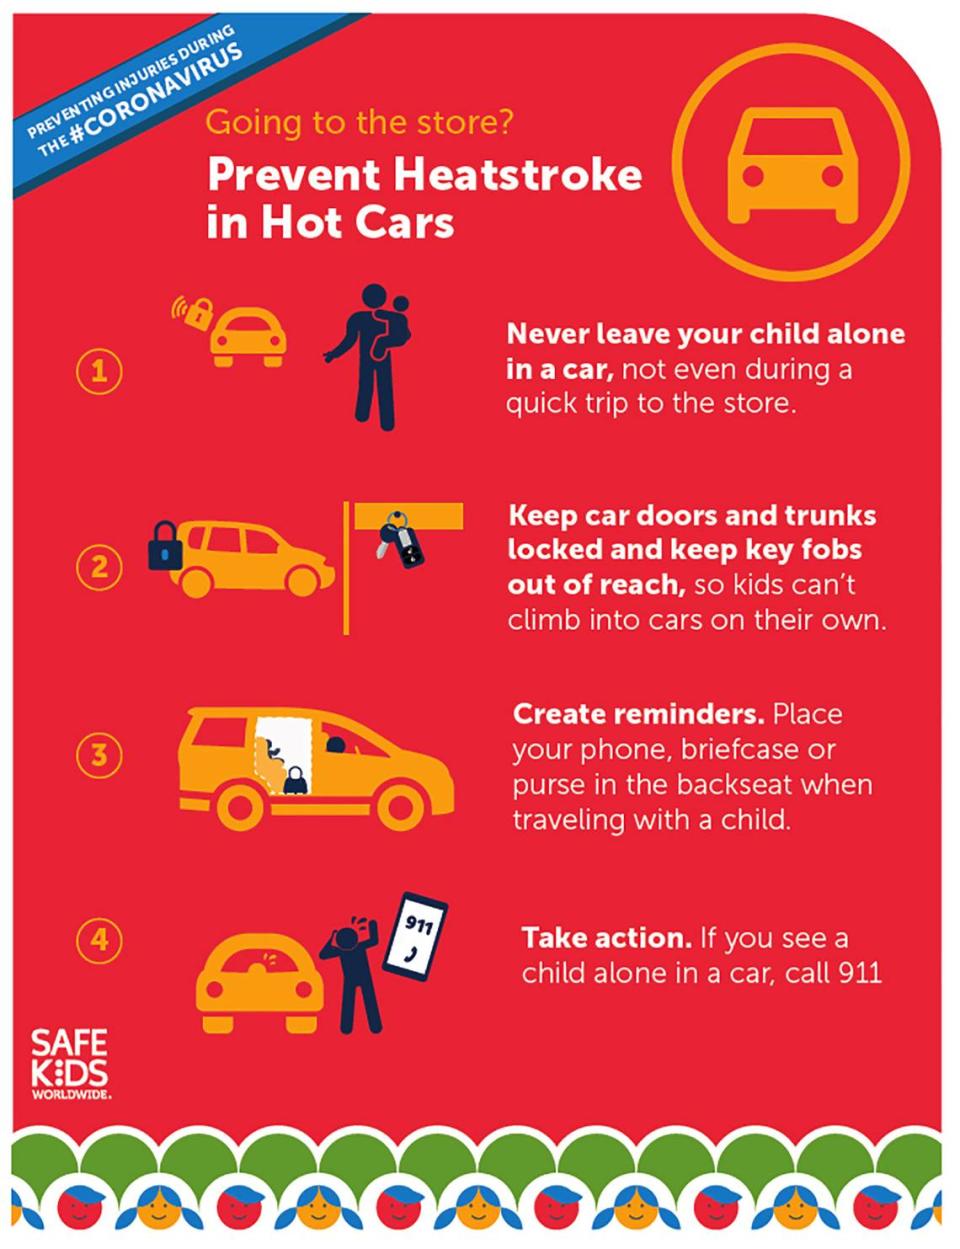 SafeKids Columbus is urging parents and caregivers to remember this: Never leave children inside a vehicle, not even during a quick trip to the store.